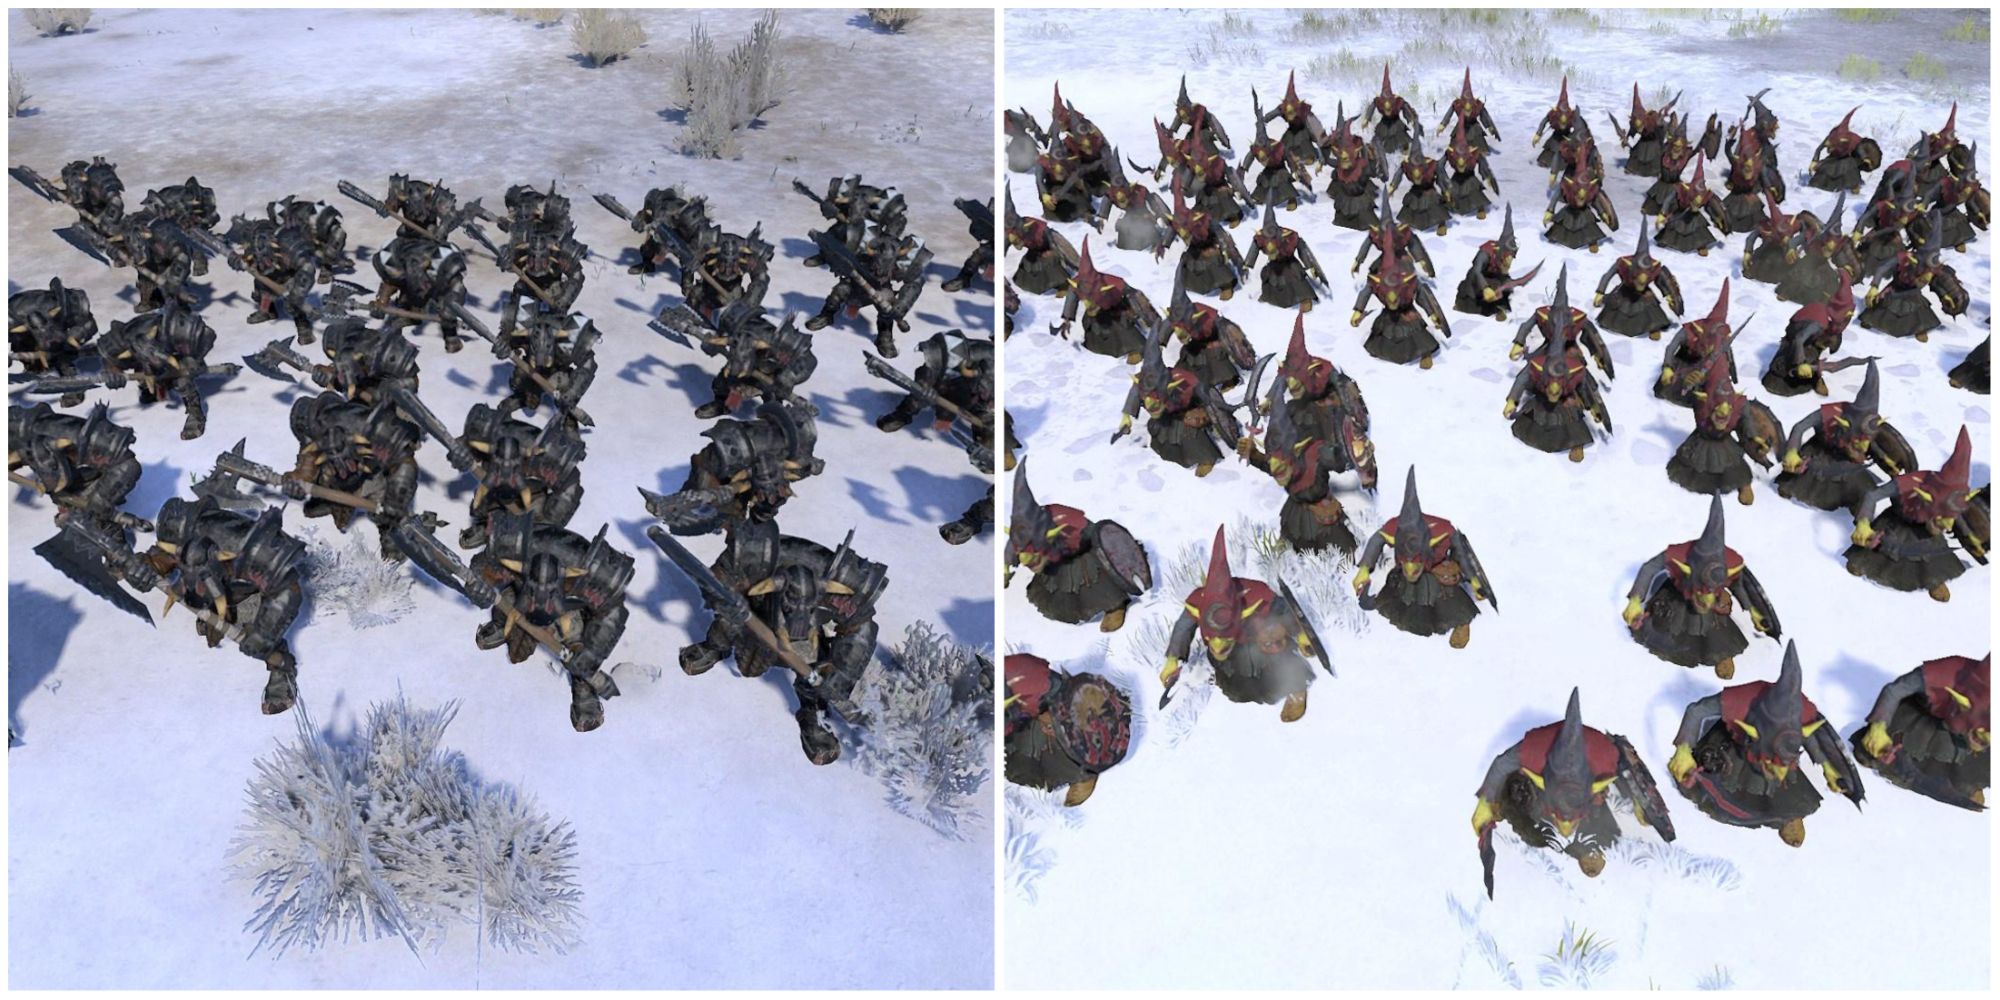 Black Orcs and Night Goblins in Total War: Warhammer 3.